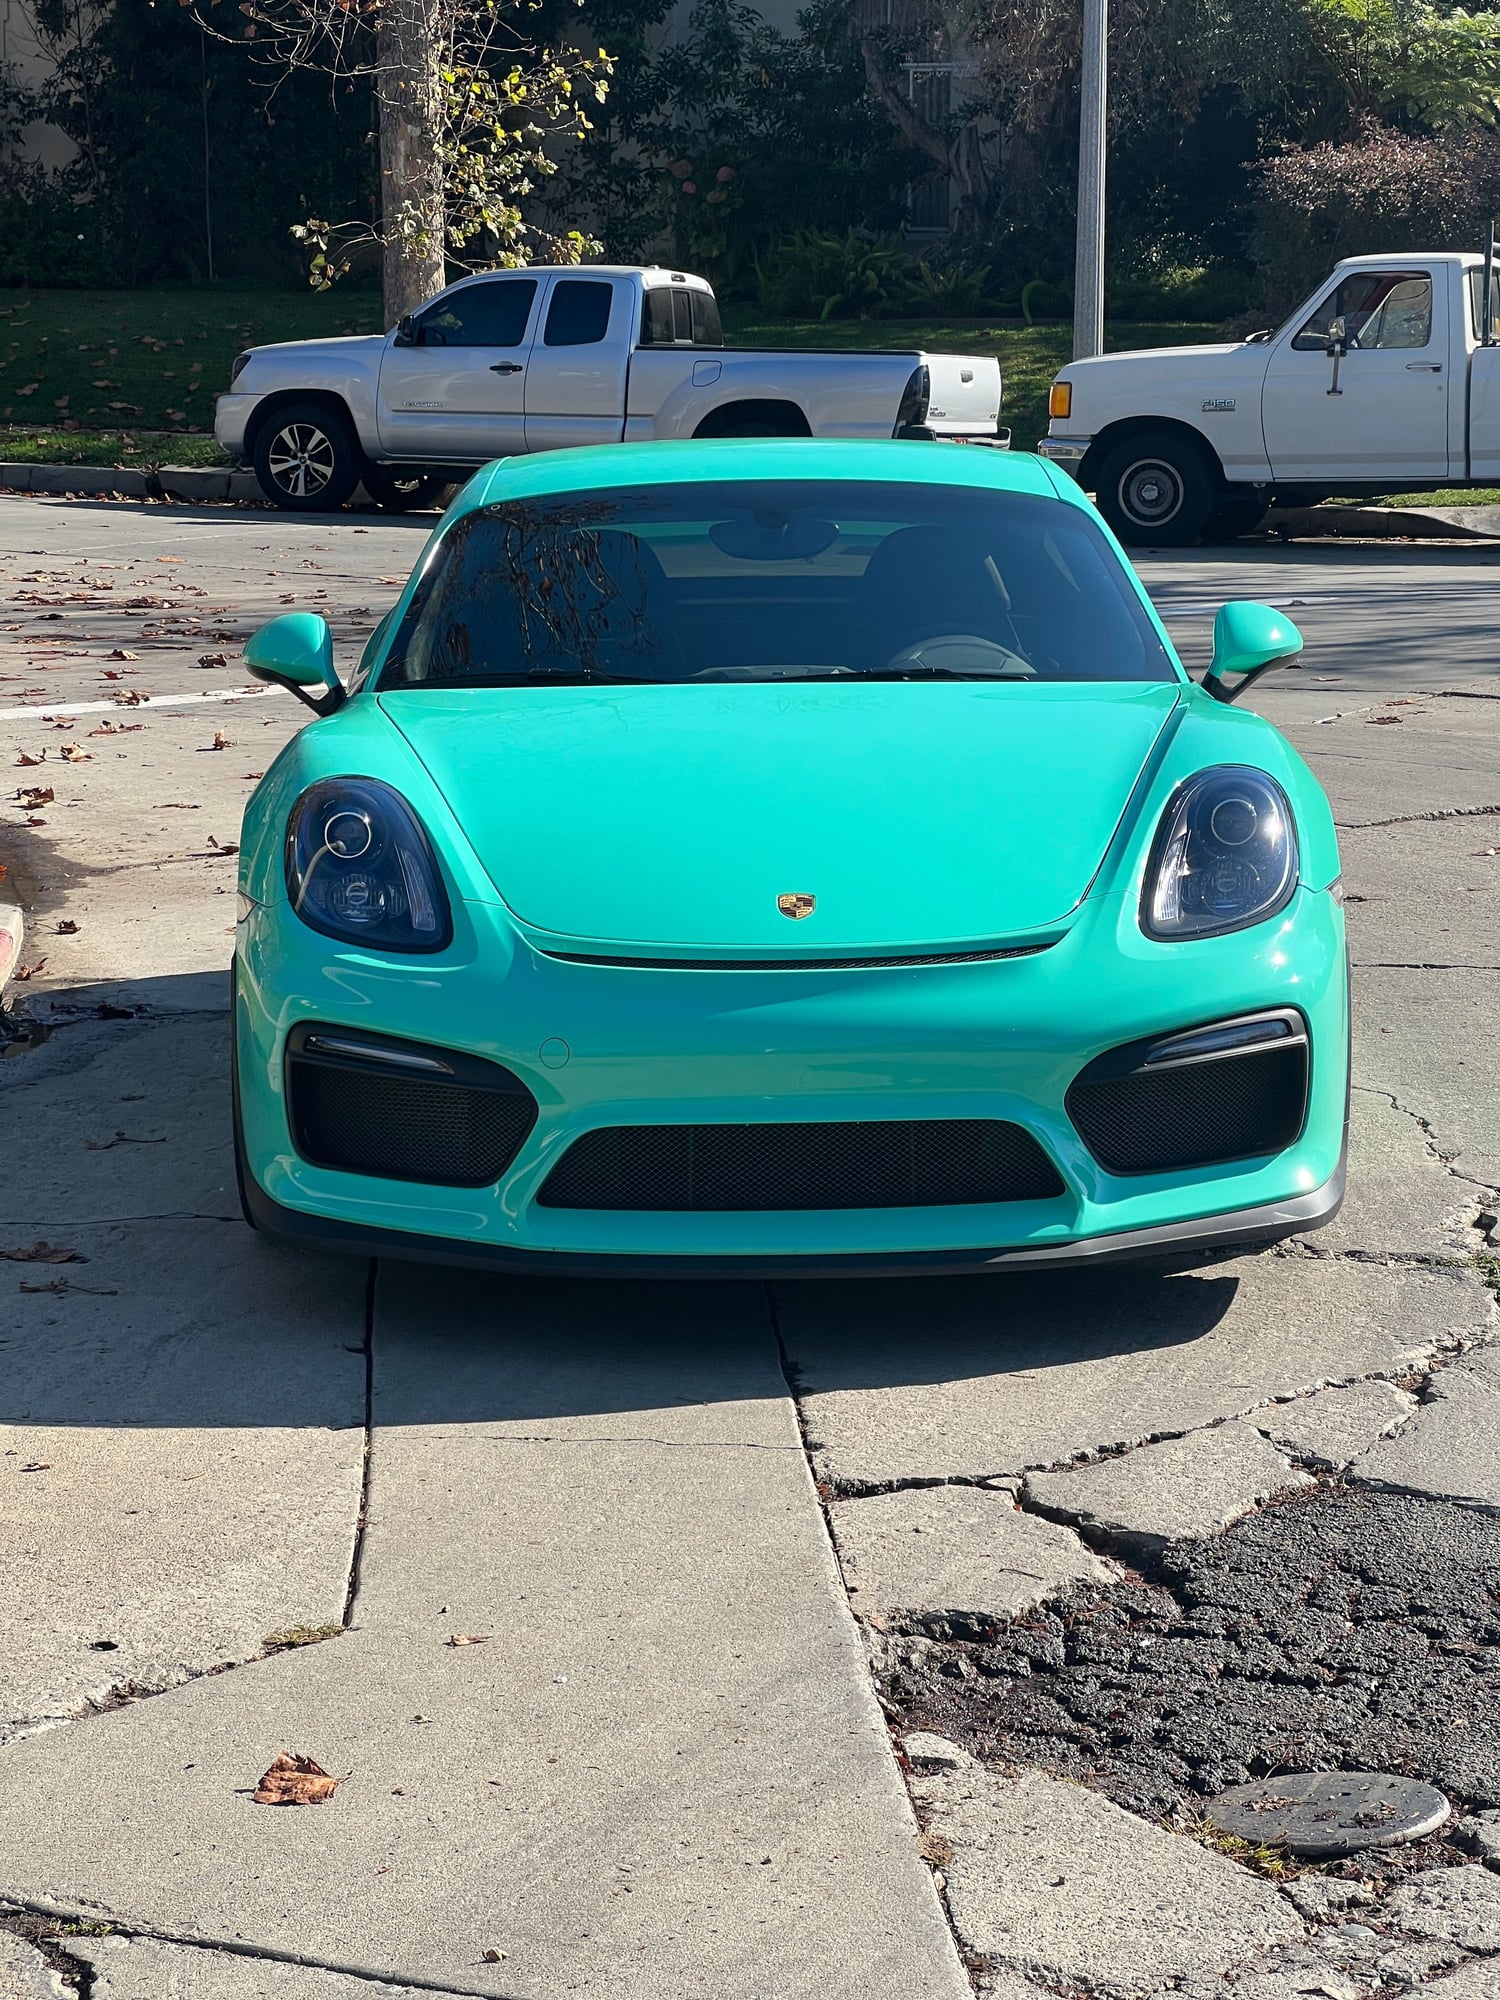 2016 Porsche Cayman GT4 - FS: 2016 Mint Green GT4! 1 of 2 PTS - Used - VIN WP0AC2A84GK192291 - 16,500 Miles - 6 cyl - 2WD - Manual - Coupe - Other - Los Angeles, CA 90004, United States